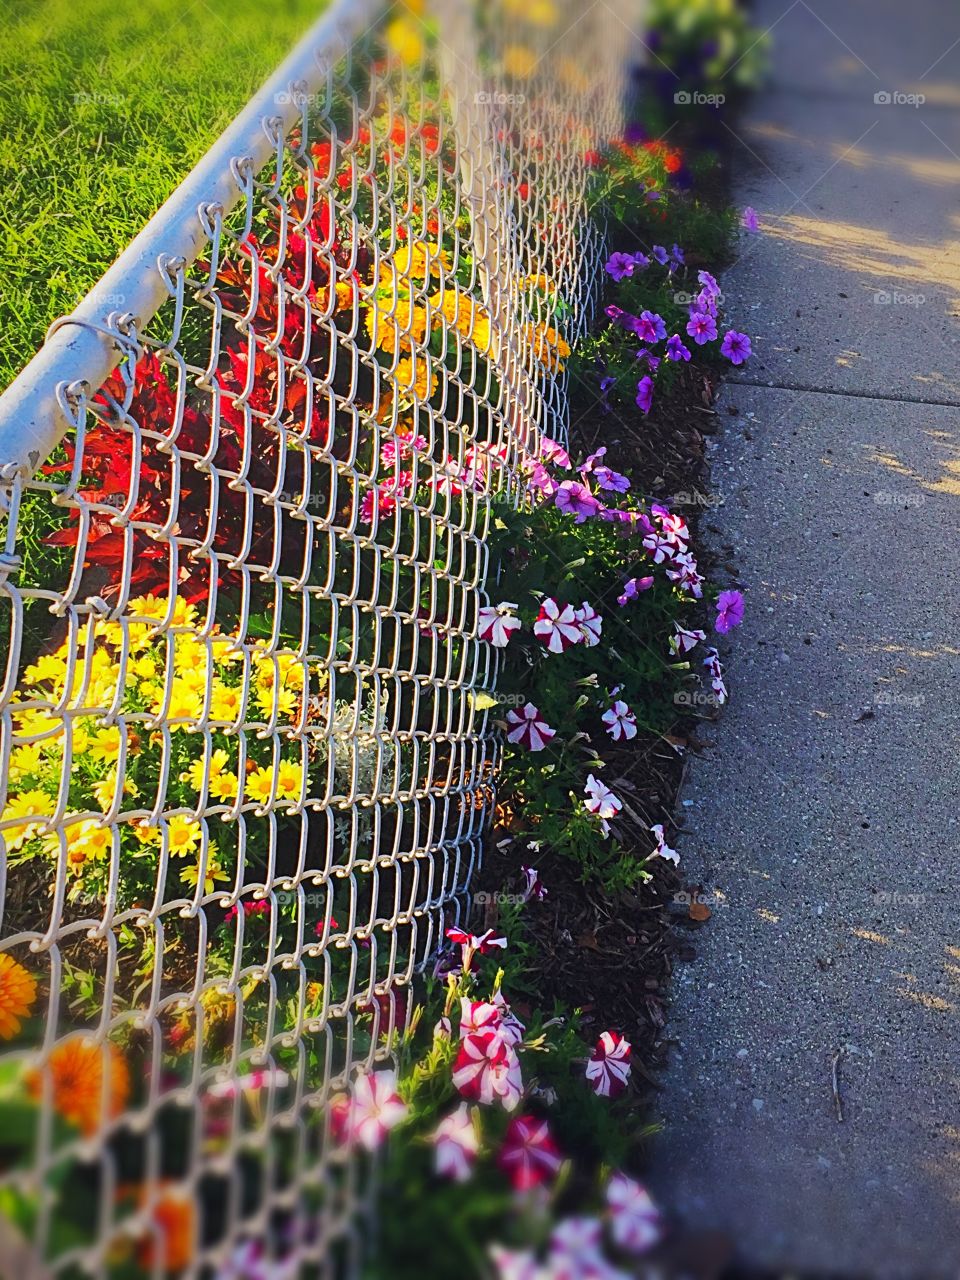 Fence flowers